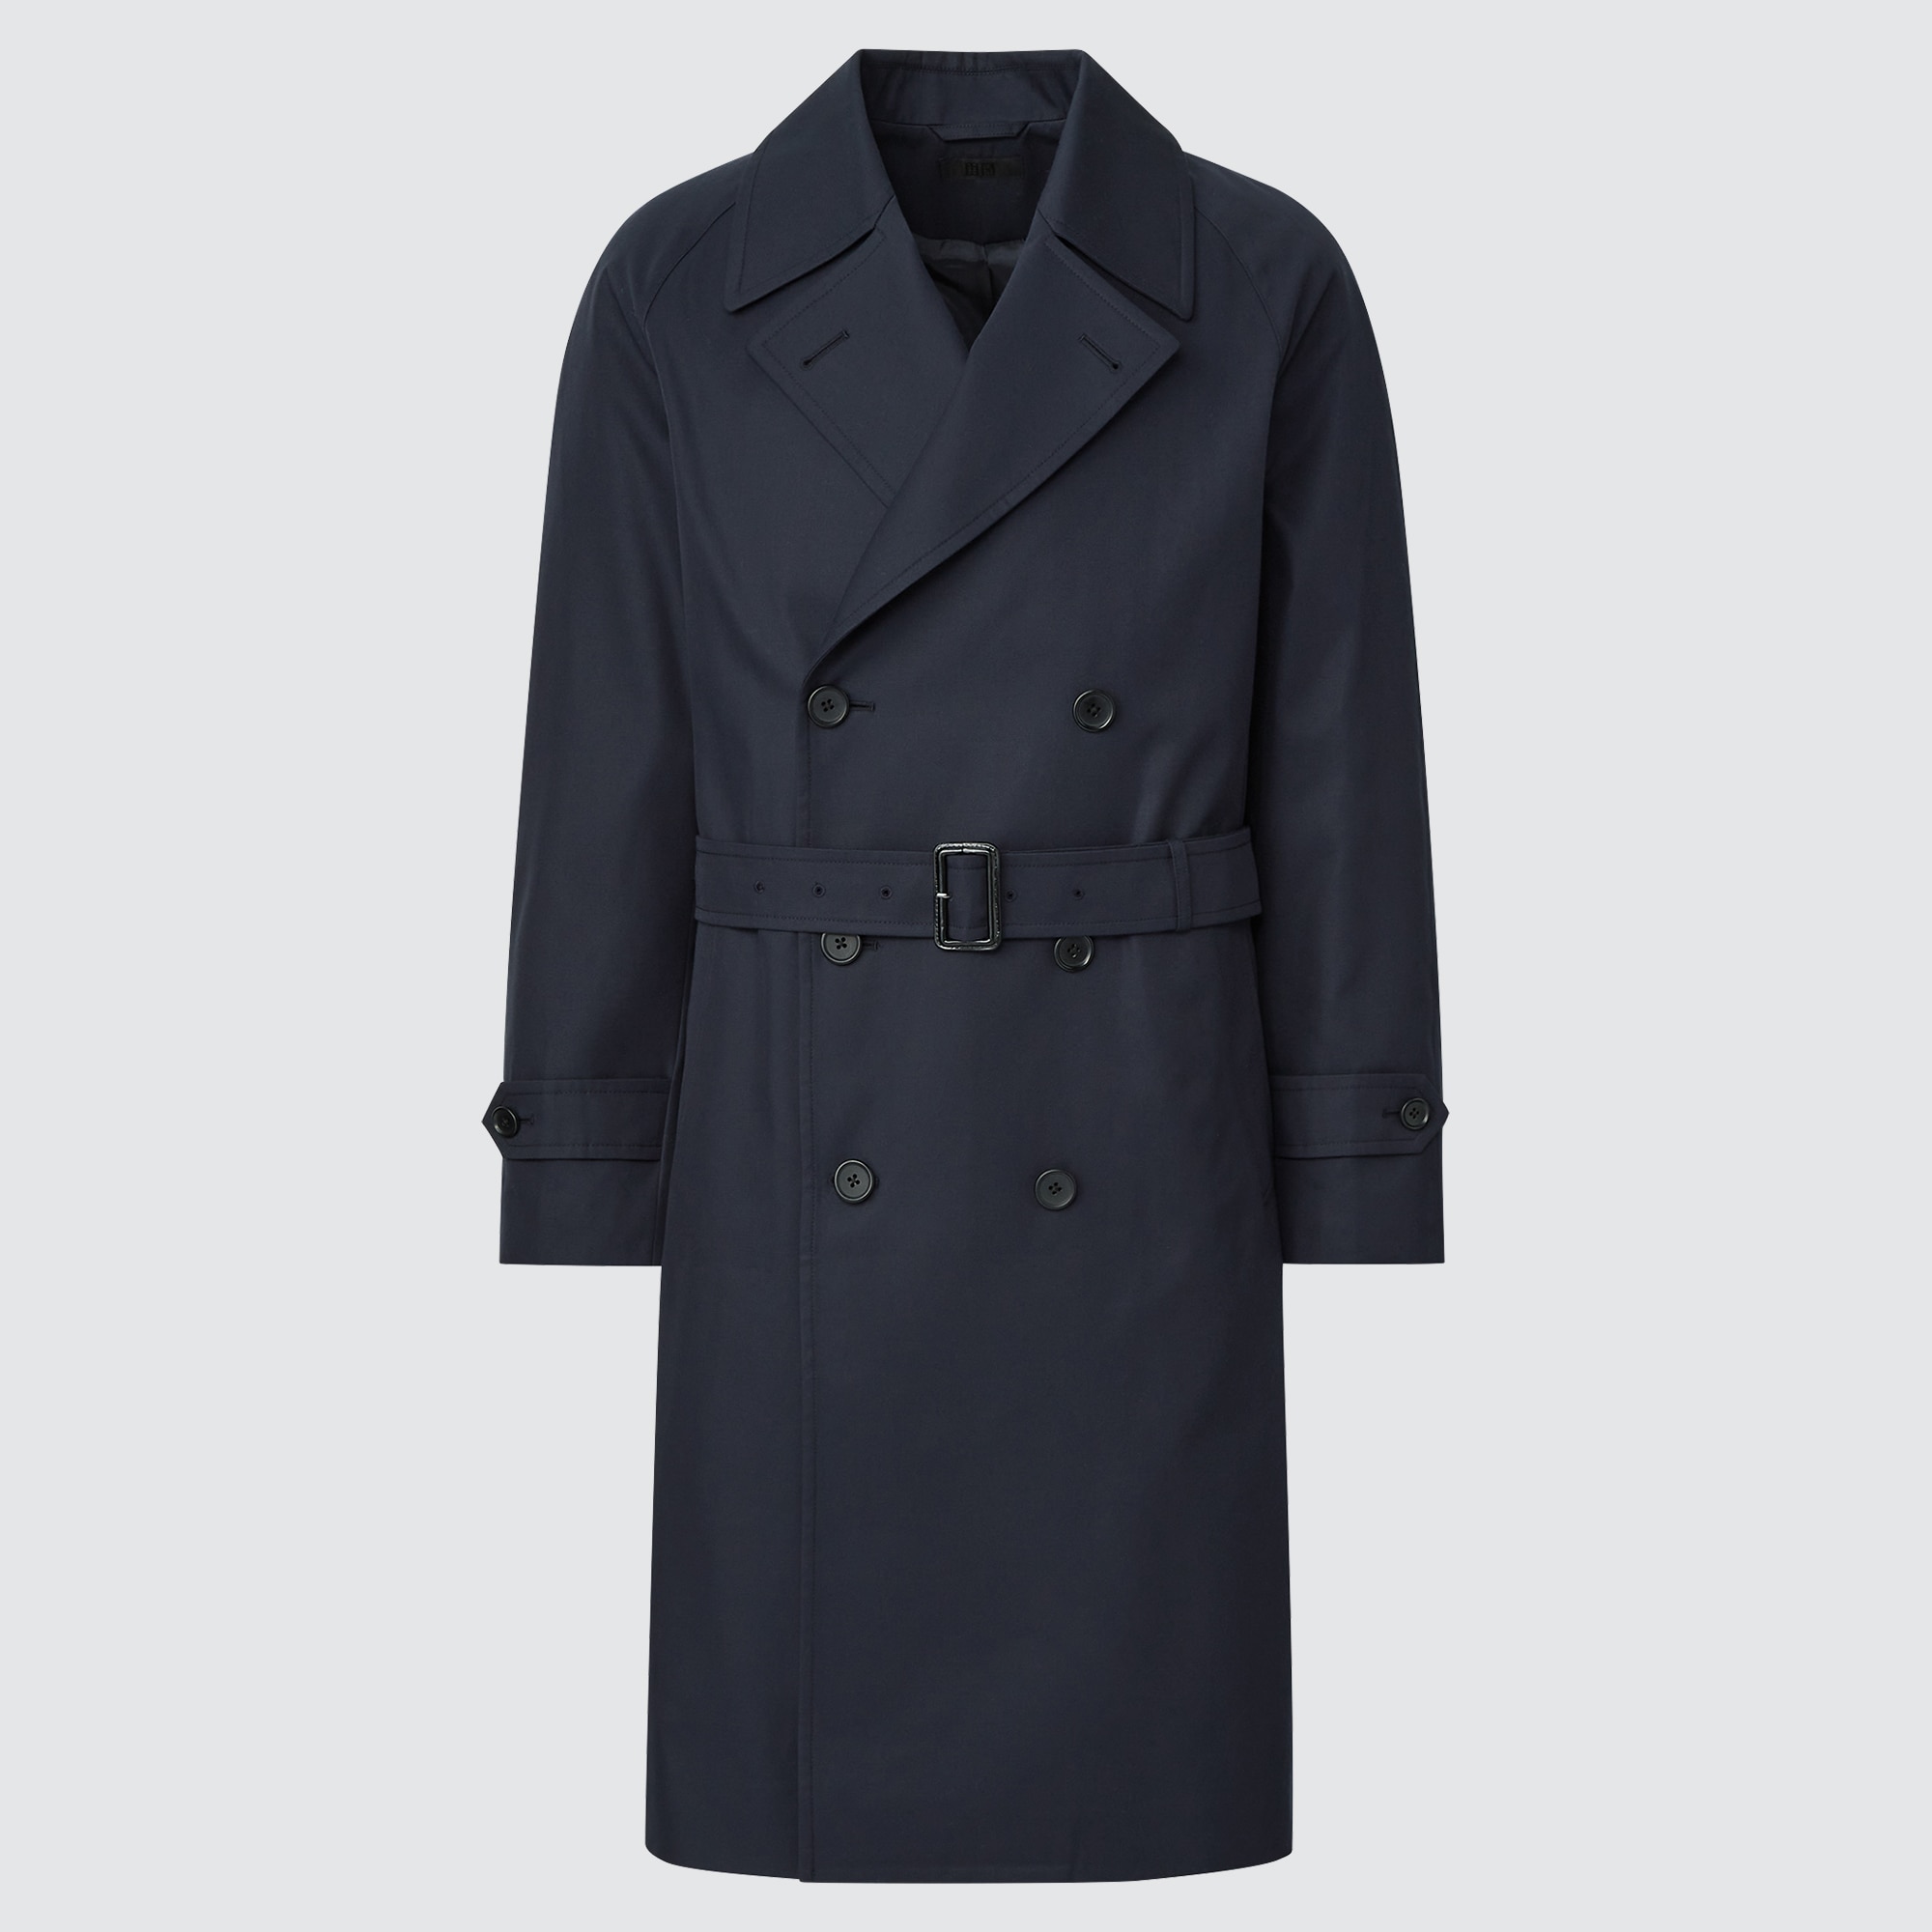 The five mostflattering styles of coat to wear this winter